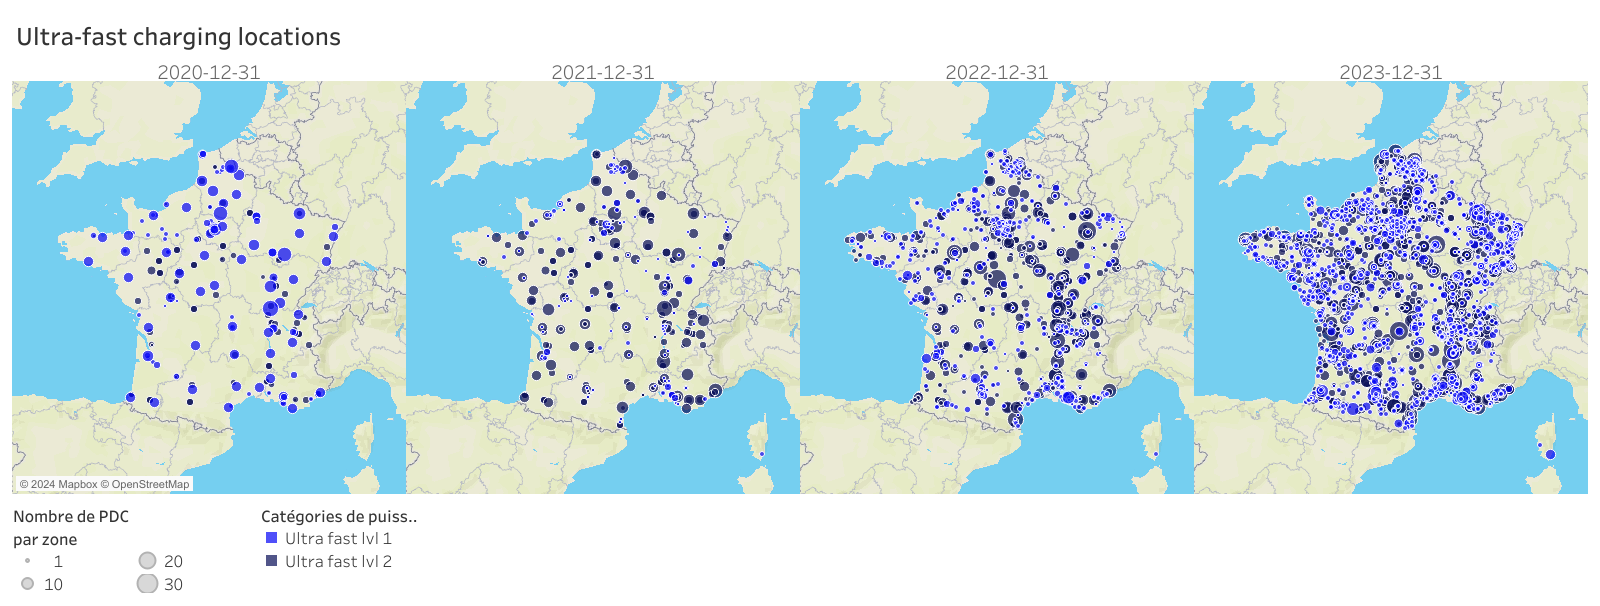 Map of France with the location of ultra fast charging points, showing the evolution from 2020 to 2023.